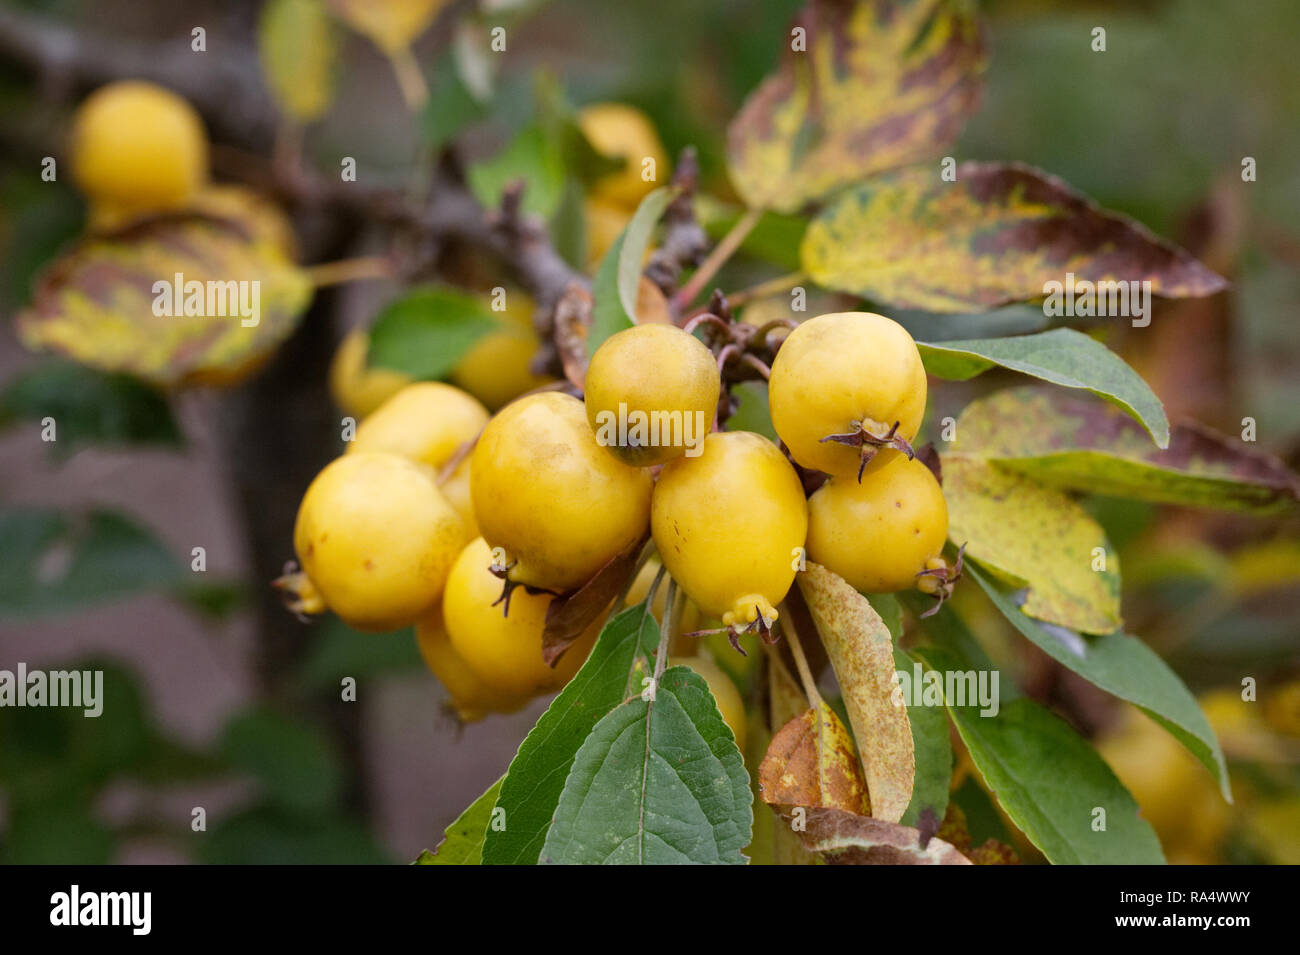 Golden Apple Award High Resolution Stock Photography And Images Alamy